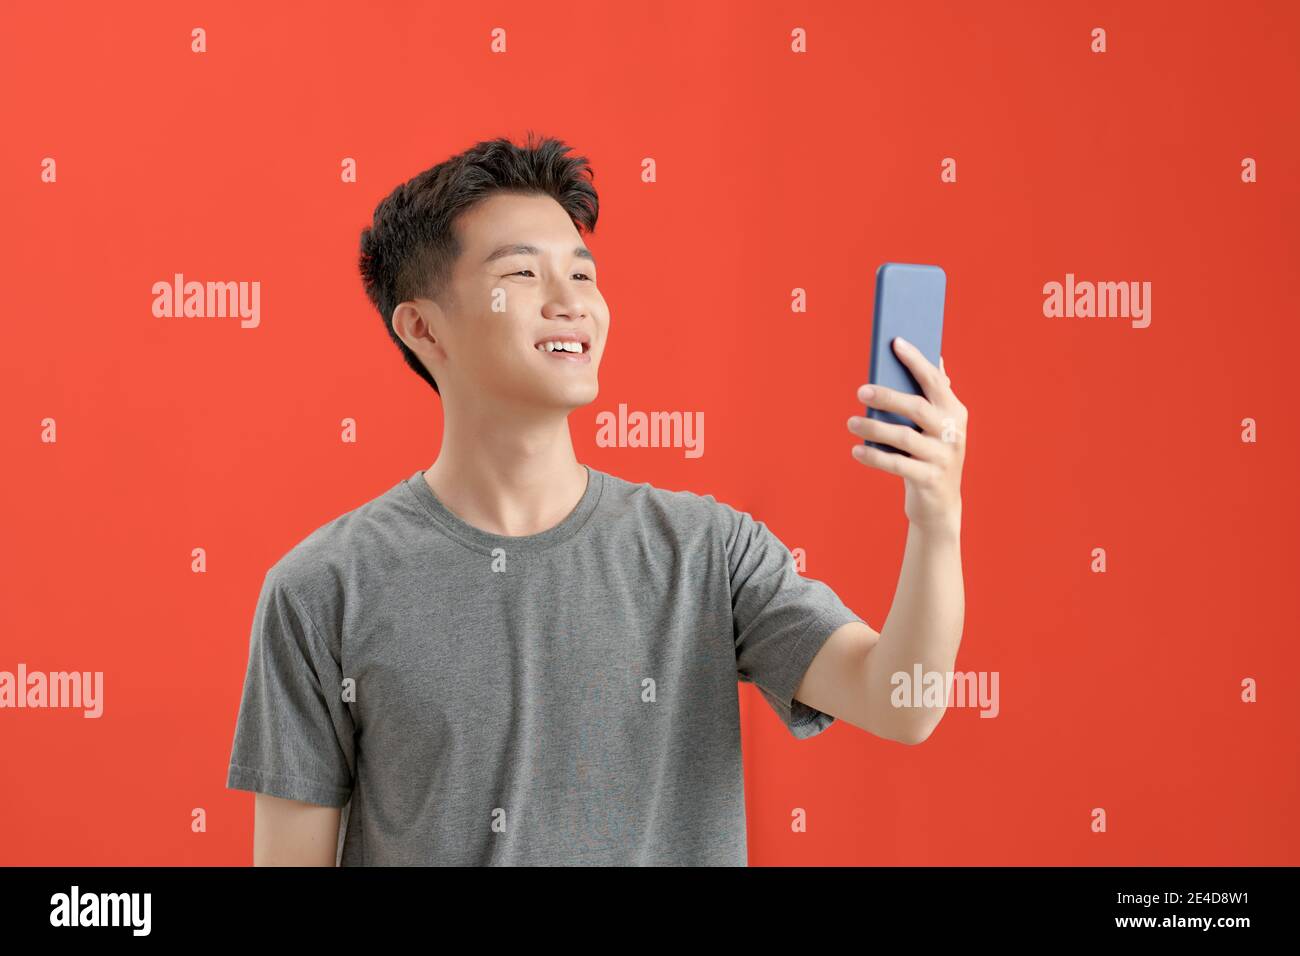 a Asian man with brown jacket making a selfie over isolated red background Stock Photo